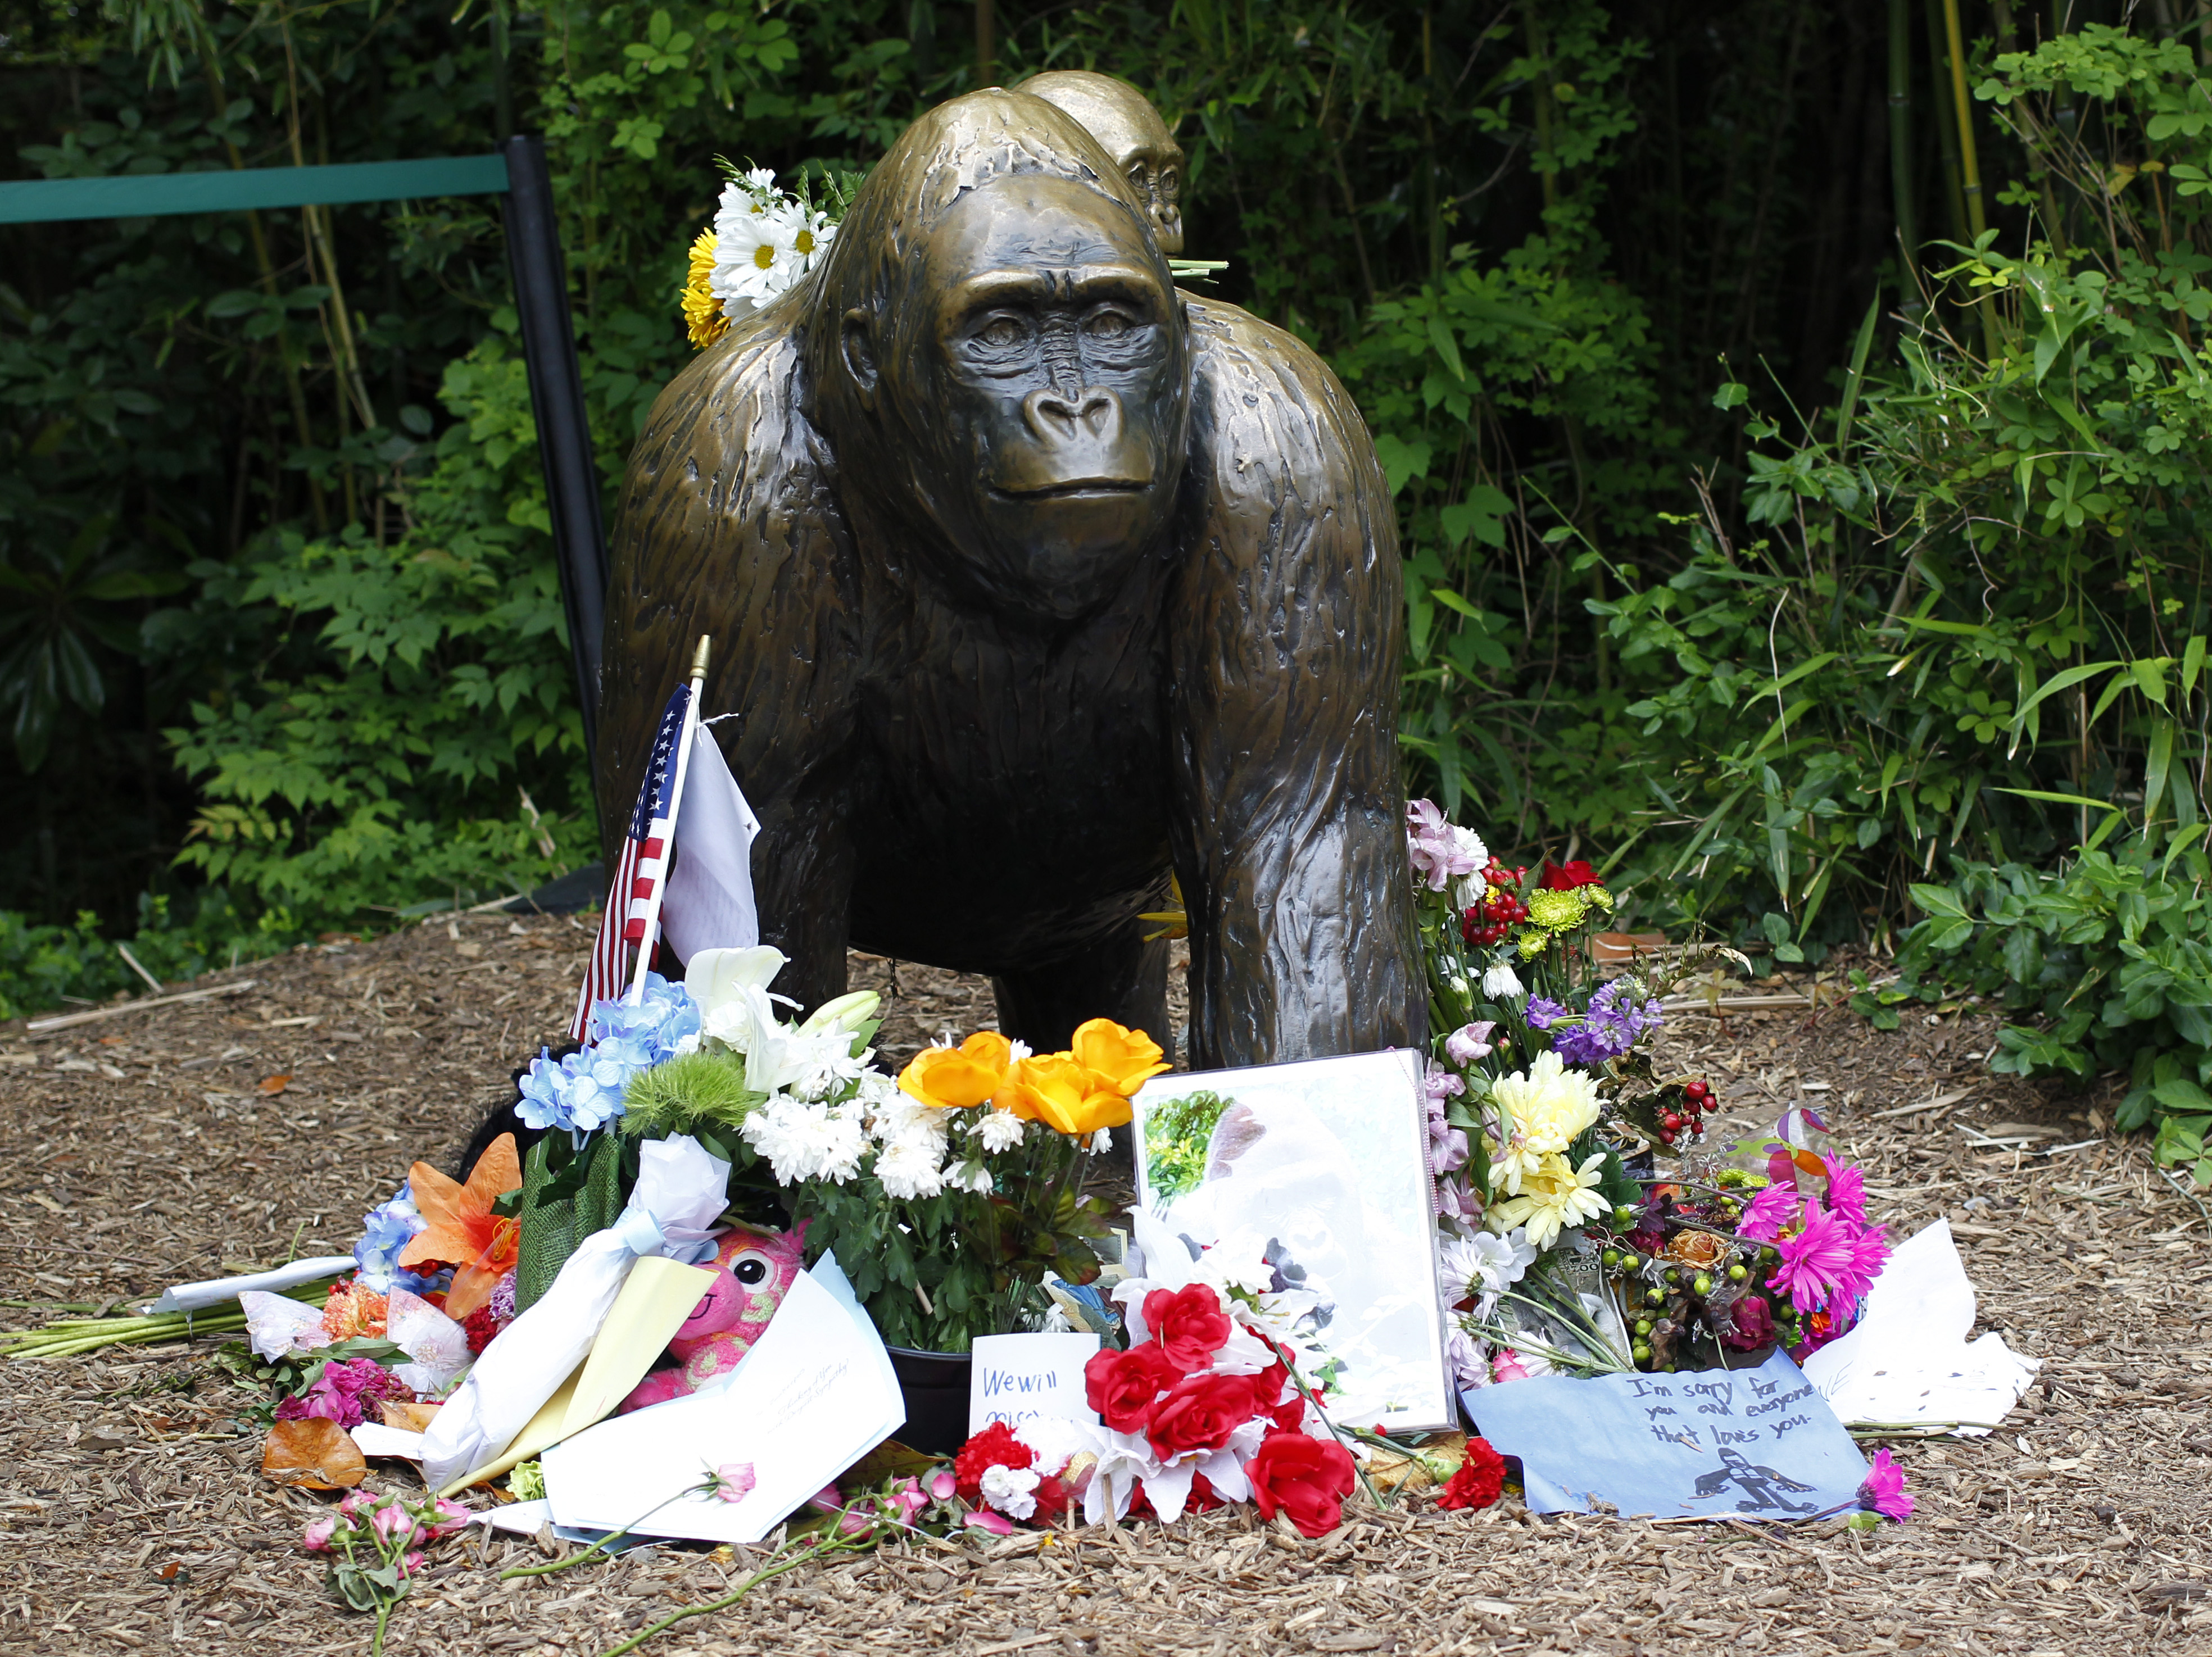 Flowers lay around a bronze statue of a gorilla and her baby outside the Cincinnati Zoo's Gorilla World exhibit in Cincinnati, Ohio, on June 2, 2016. (John Sommers II—Getty Images)